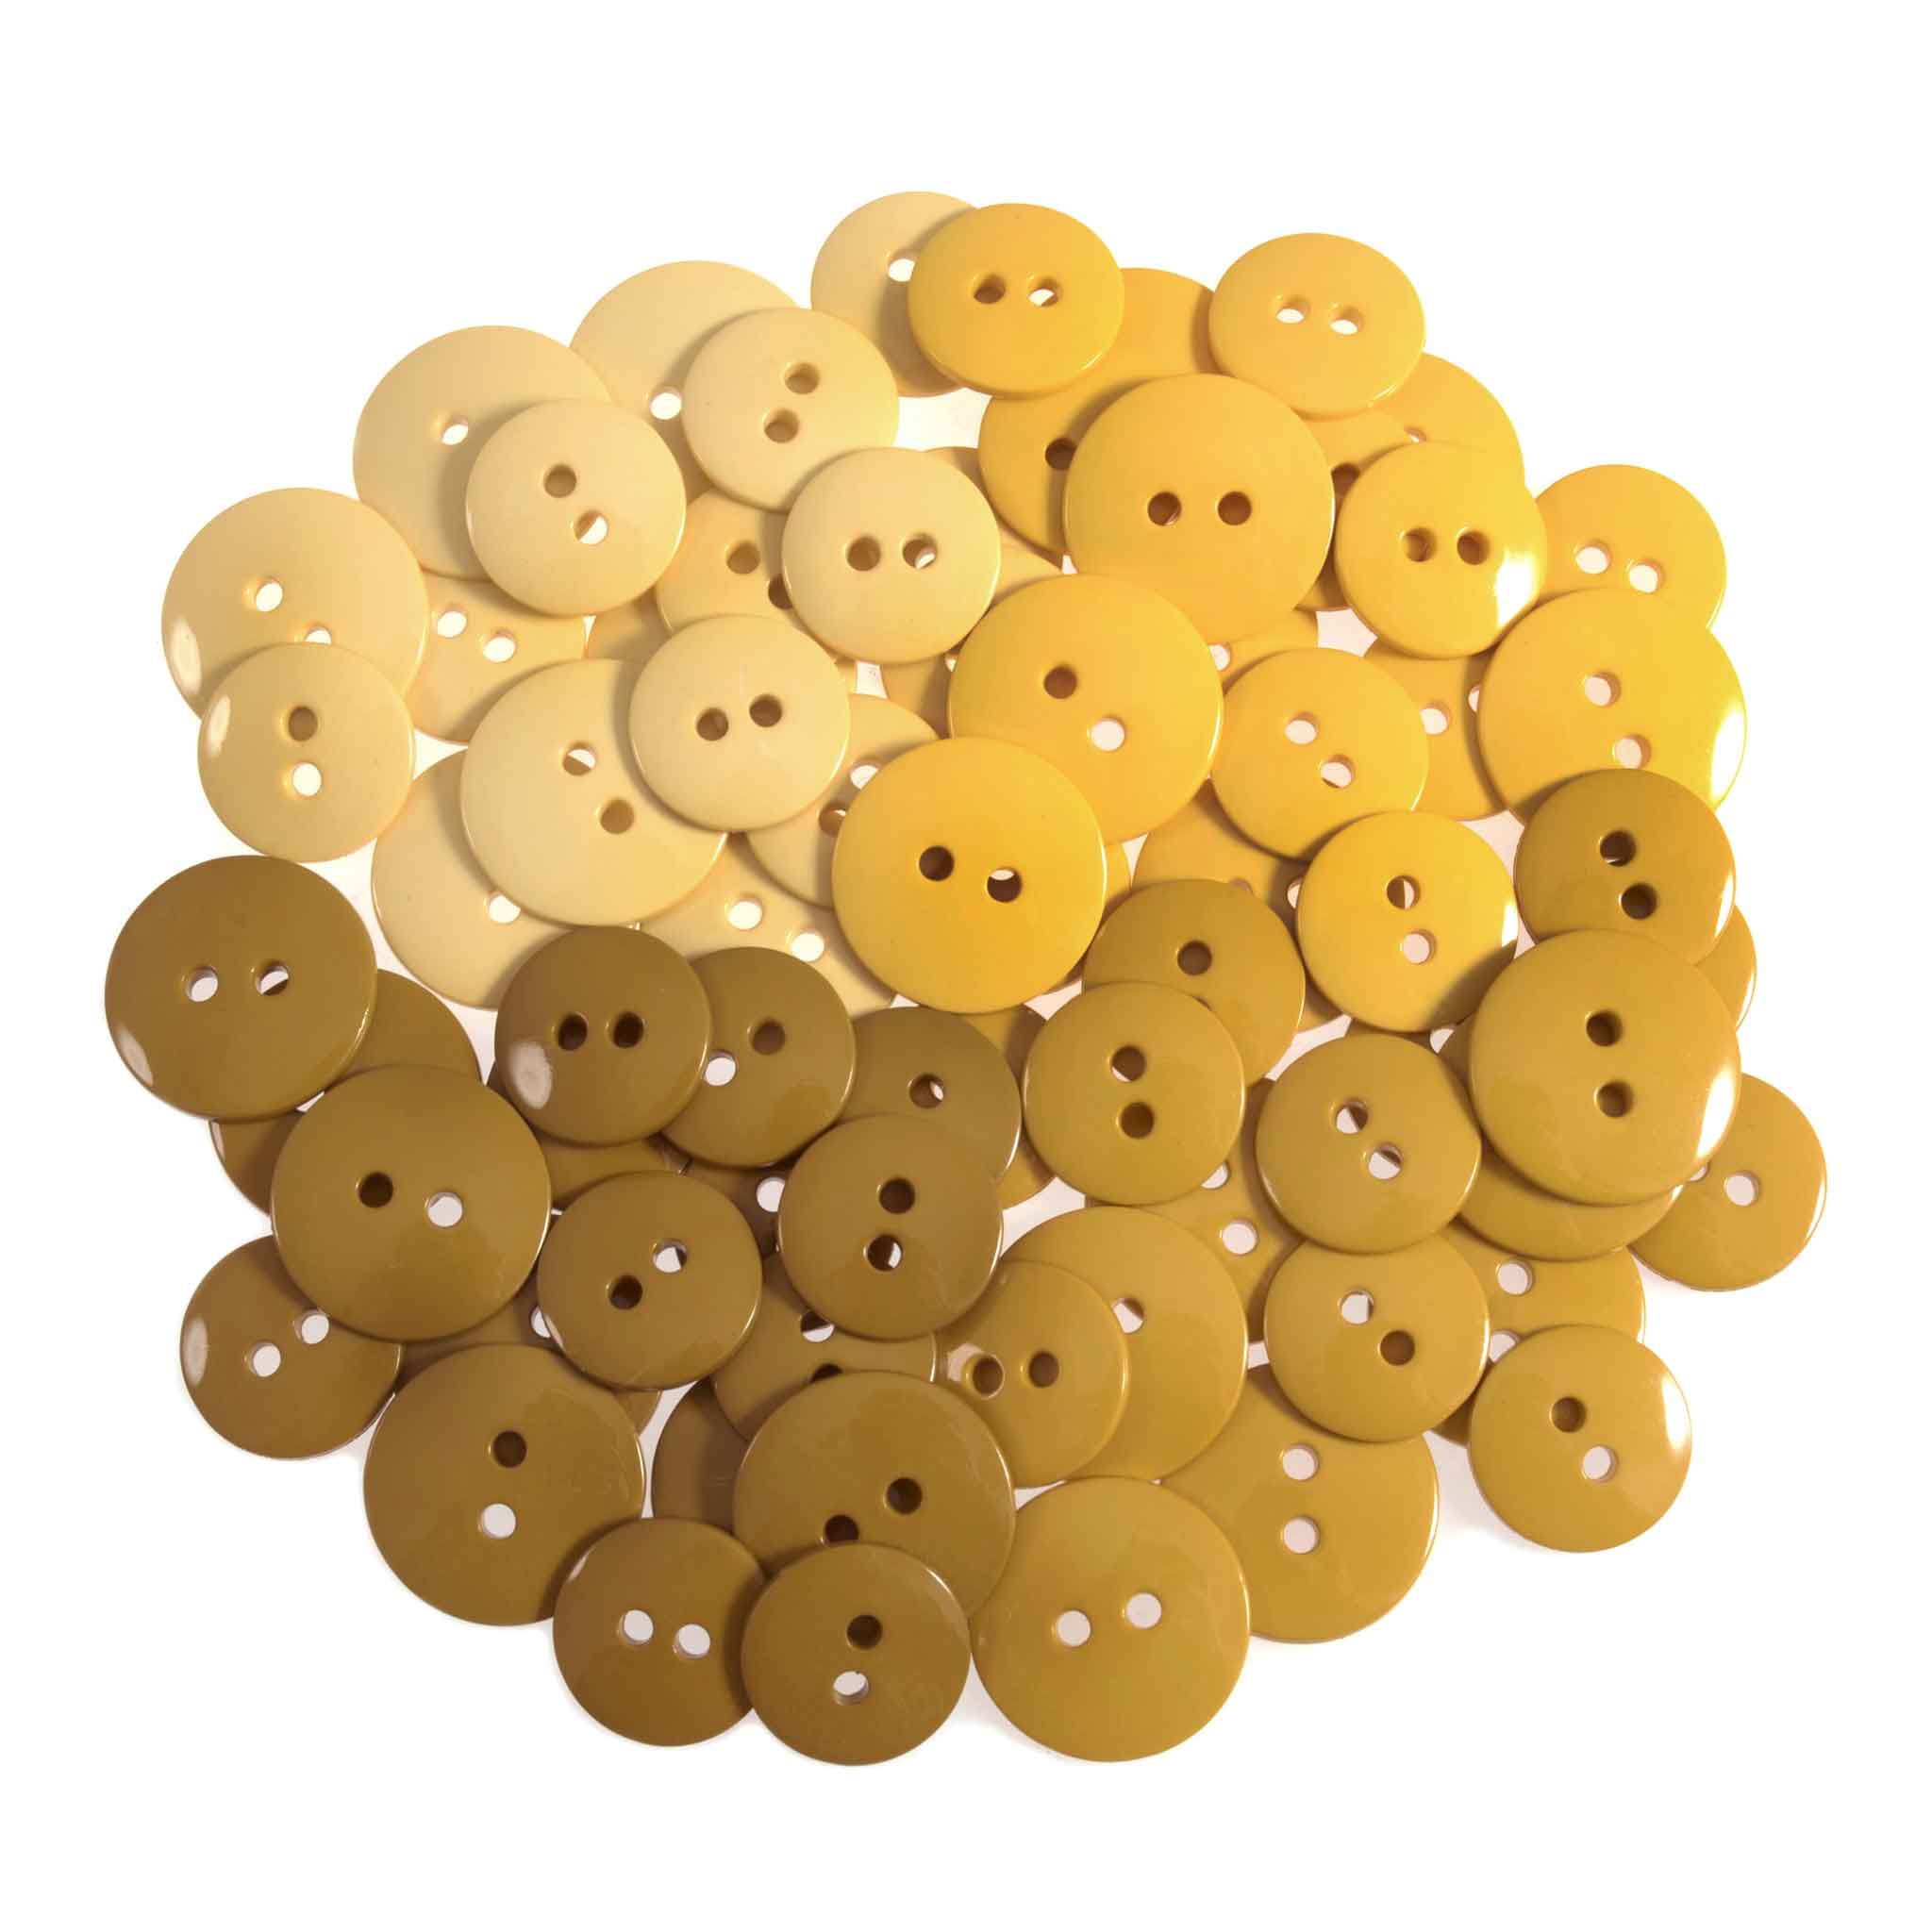 Craft Waterfall Yellow Trimits 19 and 15 mm - 72 Buttons